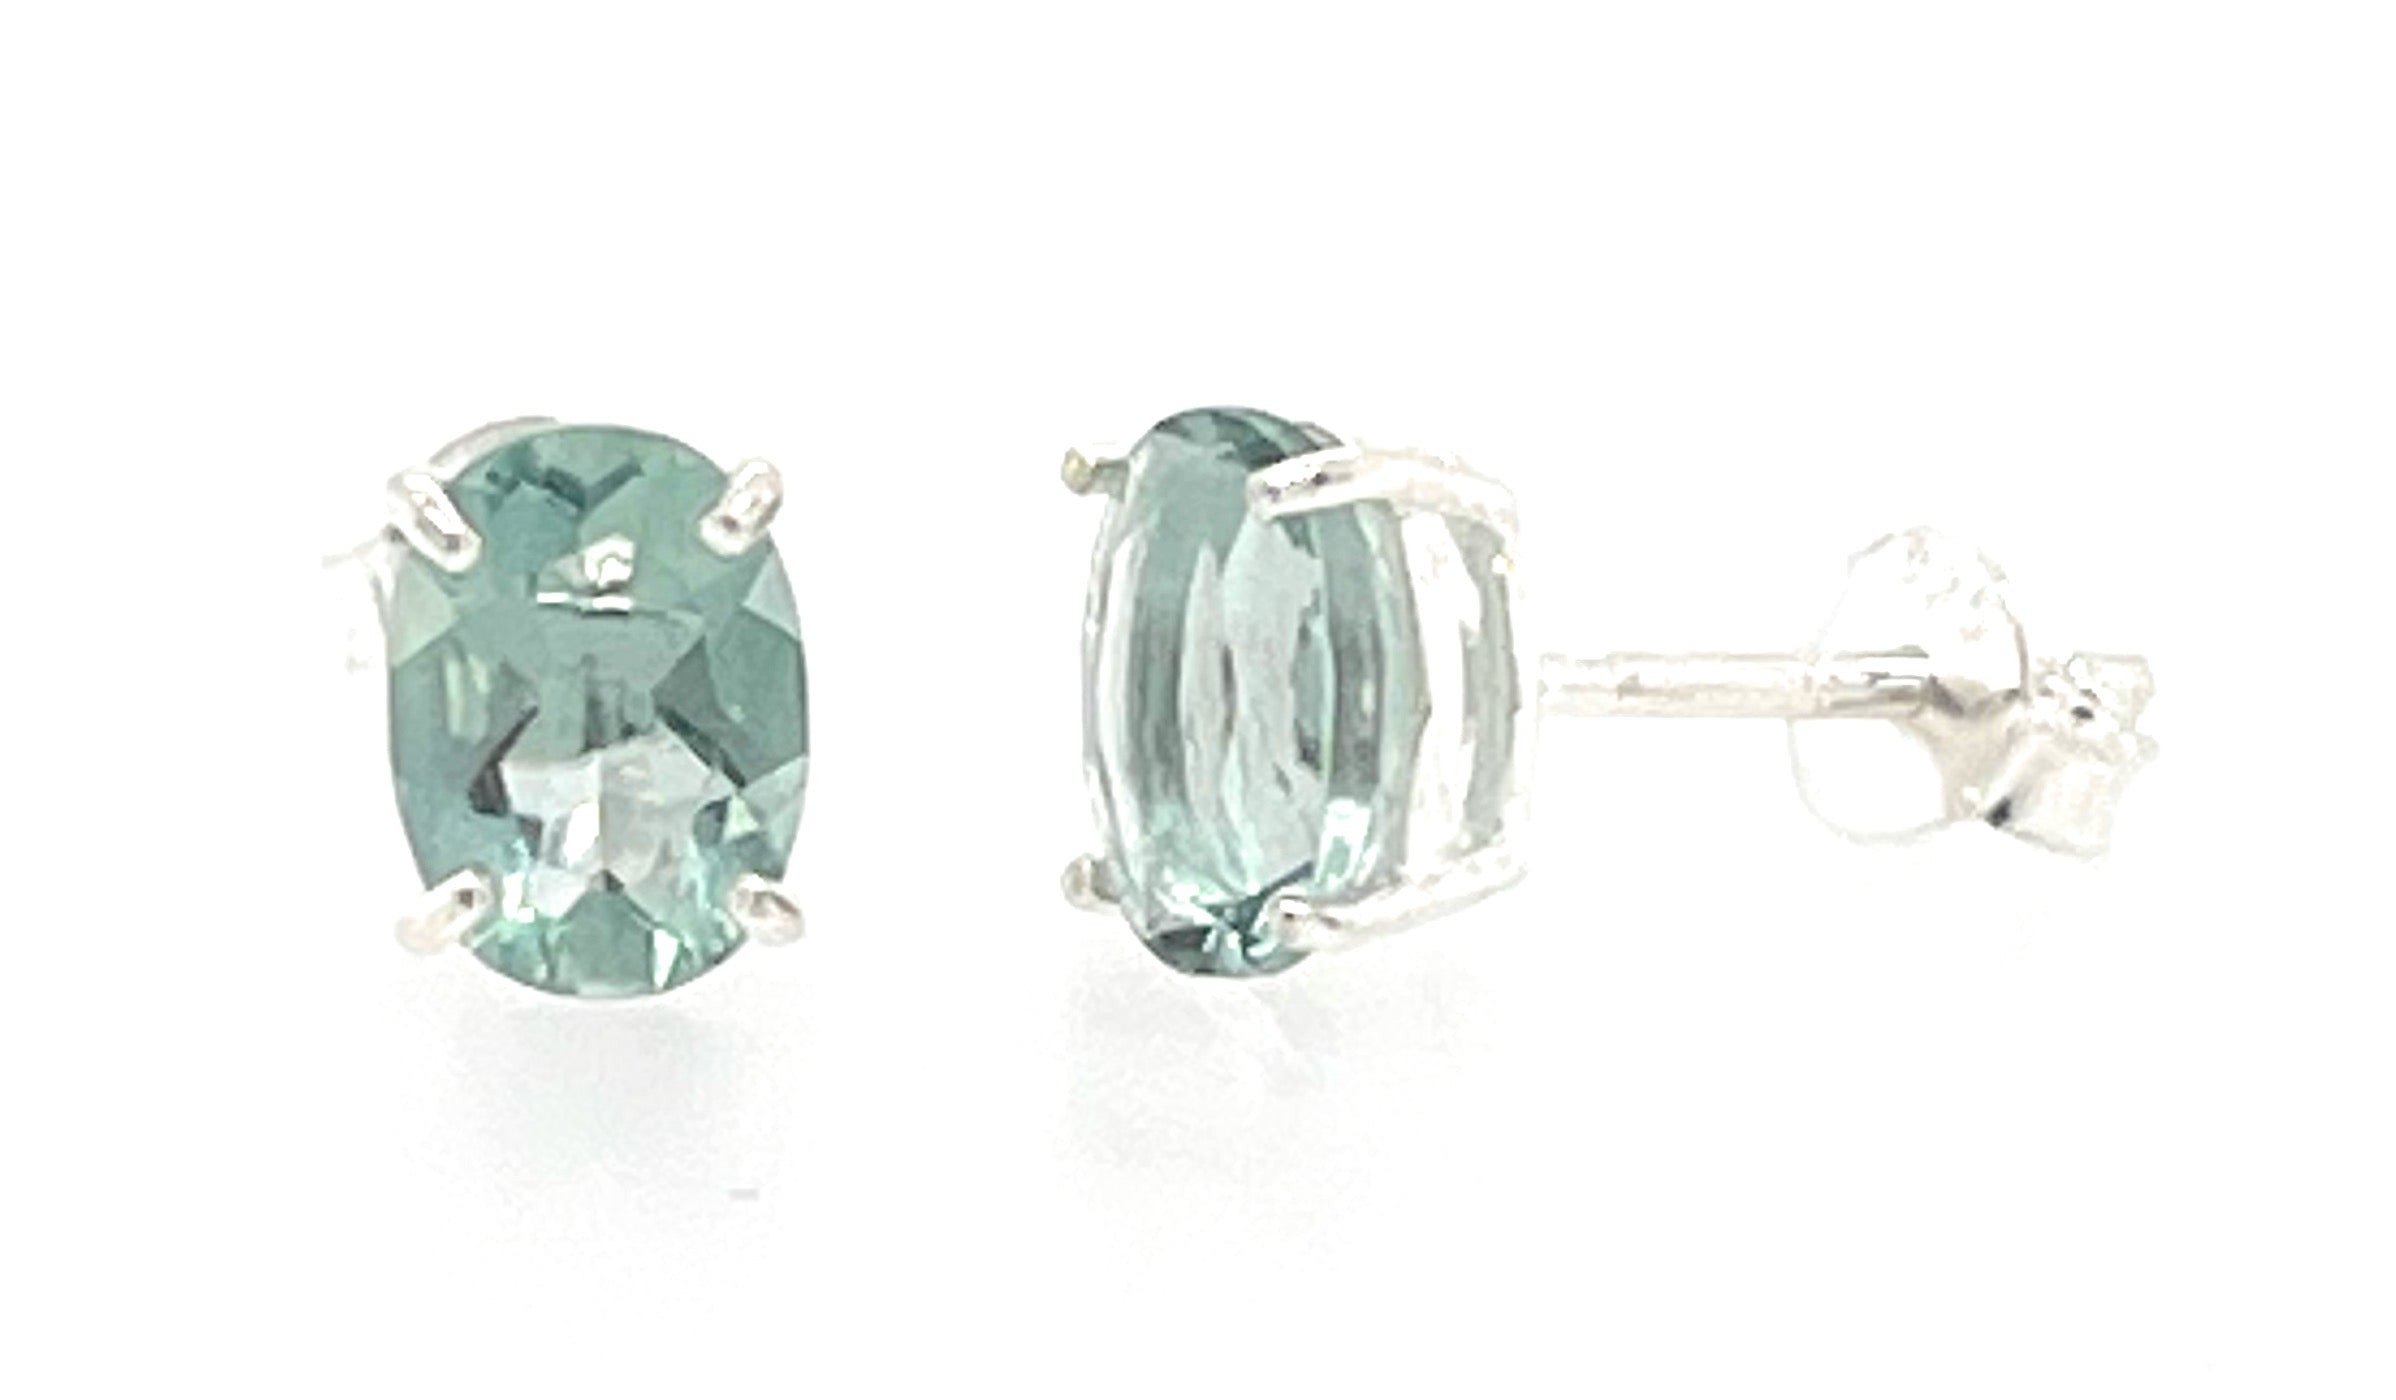 Natural 2ct Blue Aquamarine 925 Solid Sterling Silver Earrings 8mm - Natural Rocks by Kala